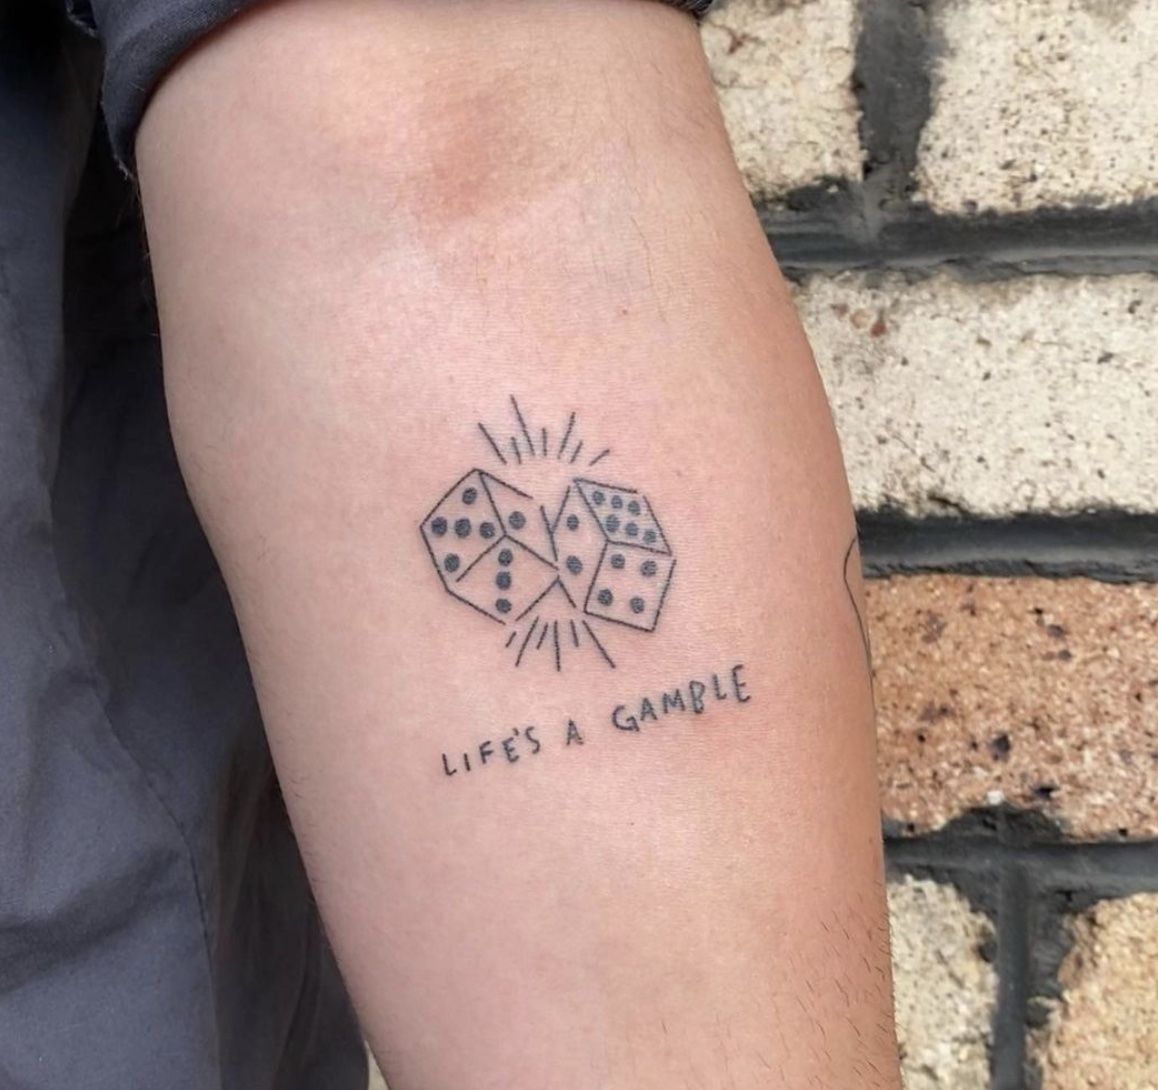 20 Of The Best Stick And Poke Tattoos For Men in 2023